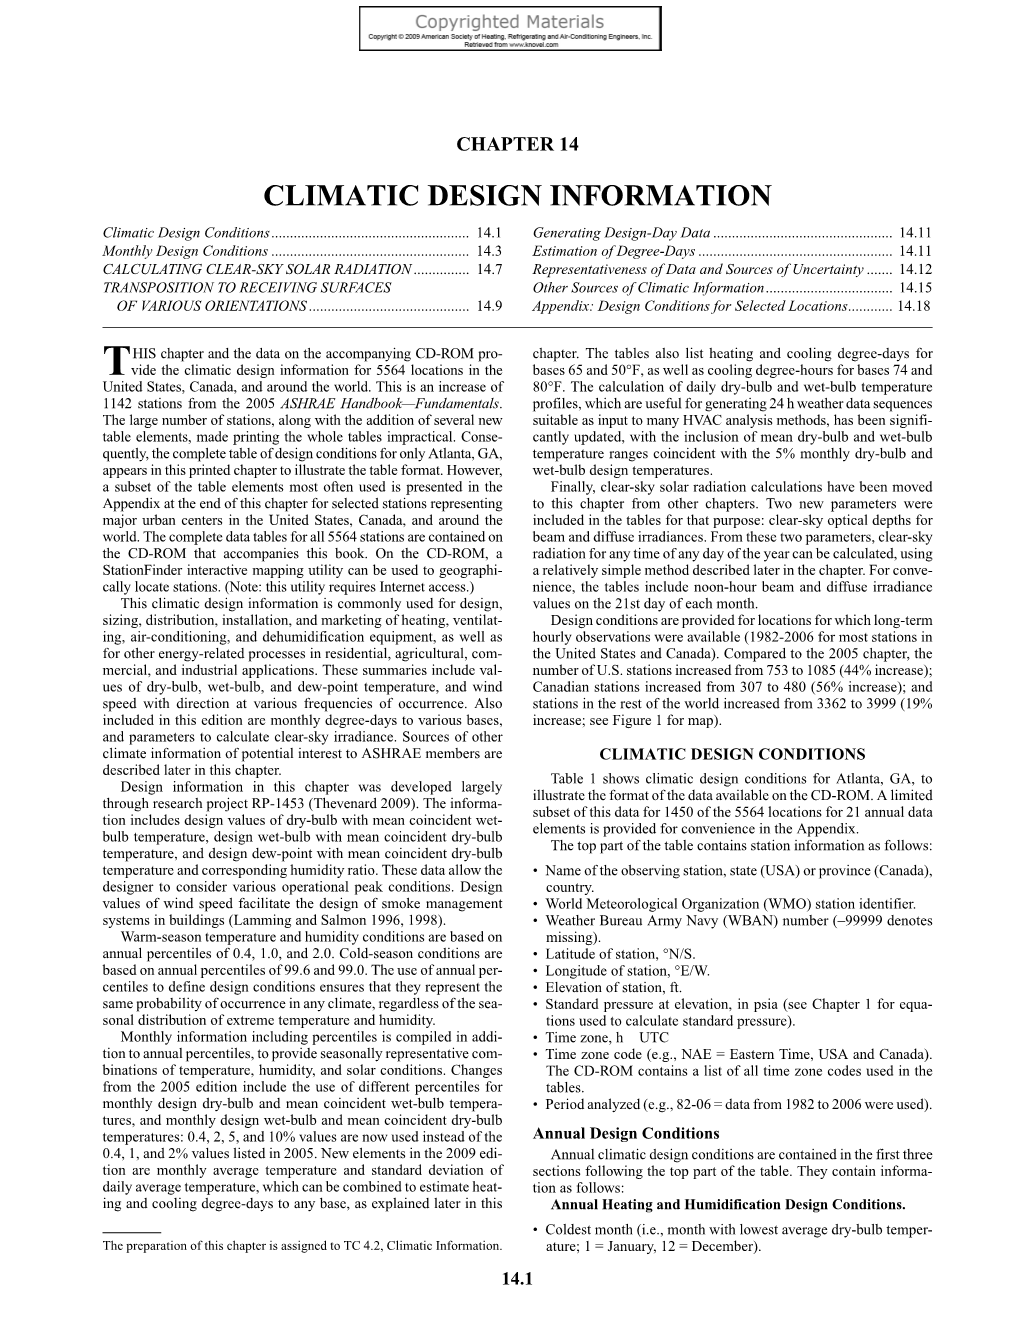 CLIMATIC DESIGN INFORMATION Climatic Design Conditions